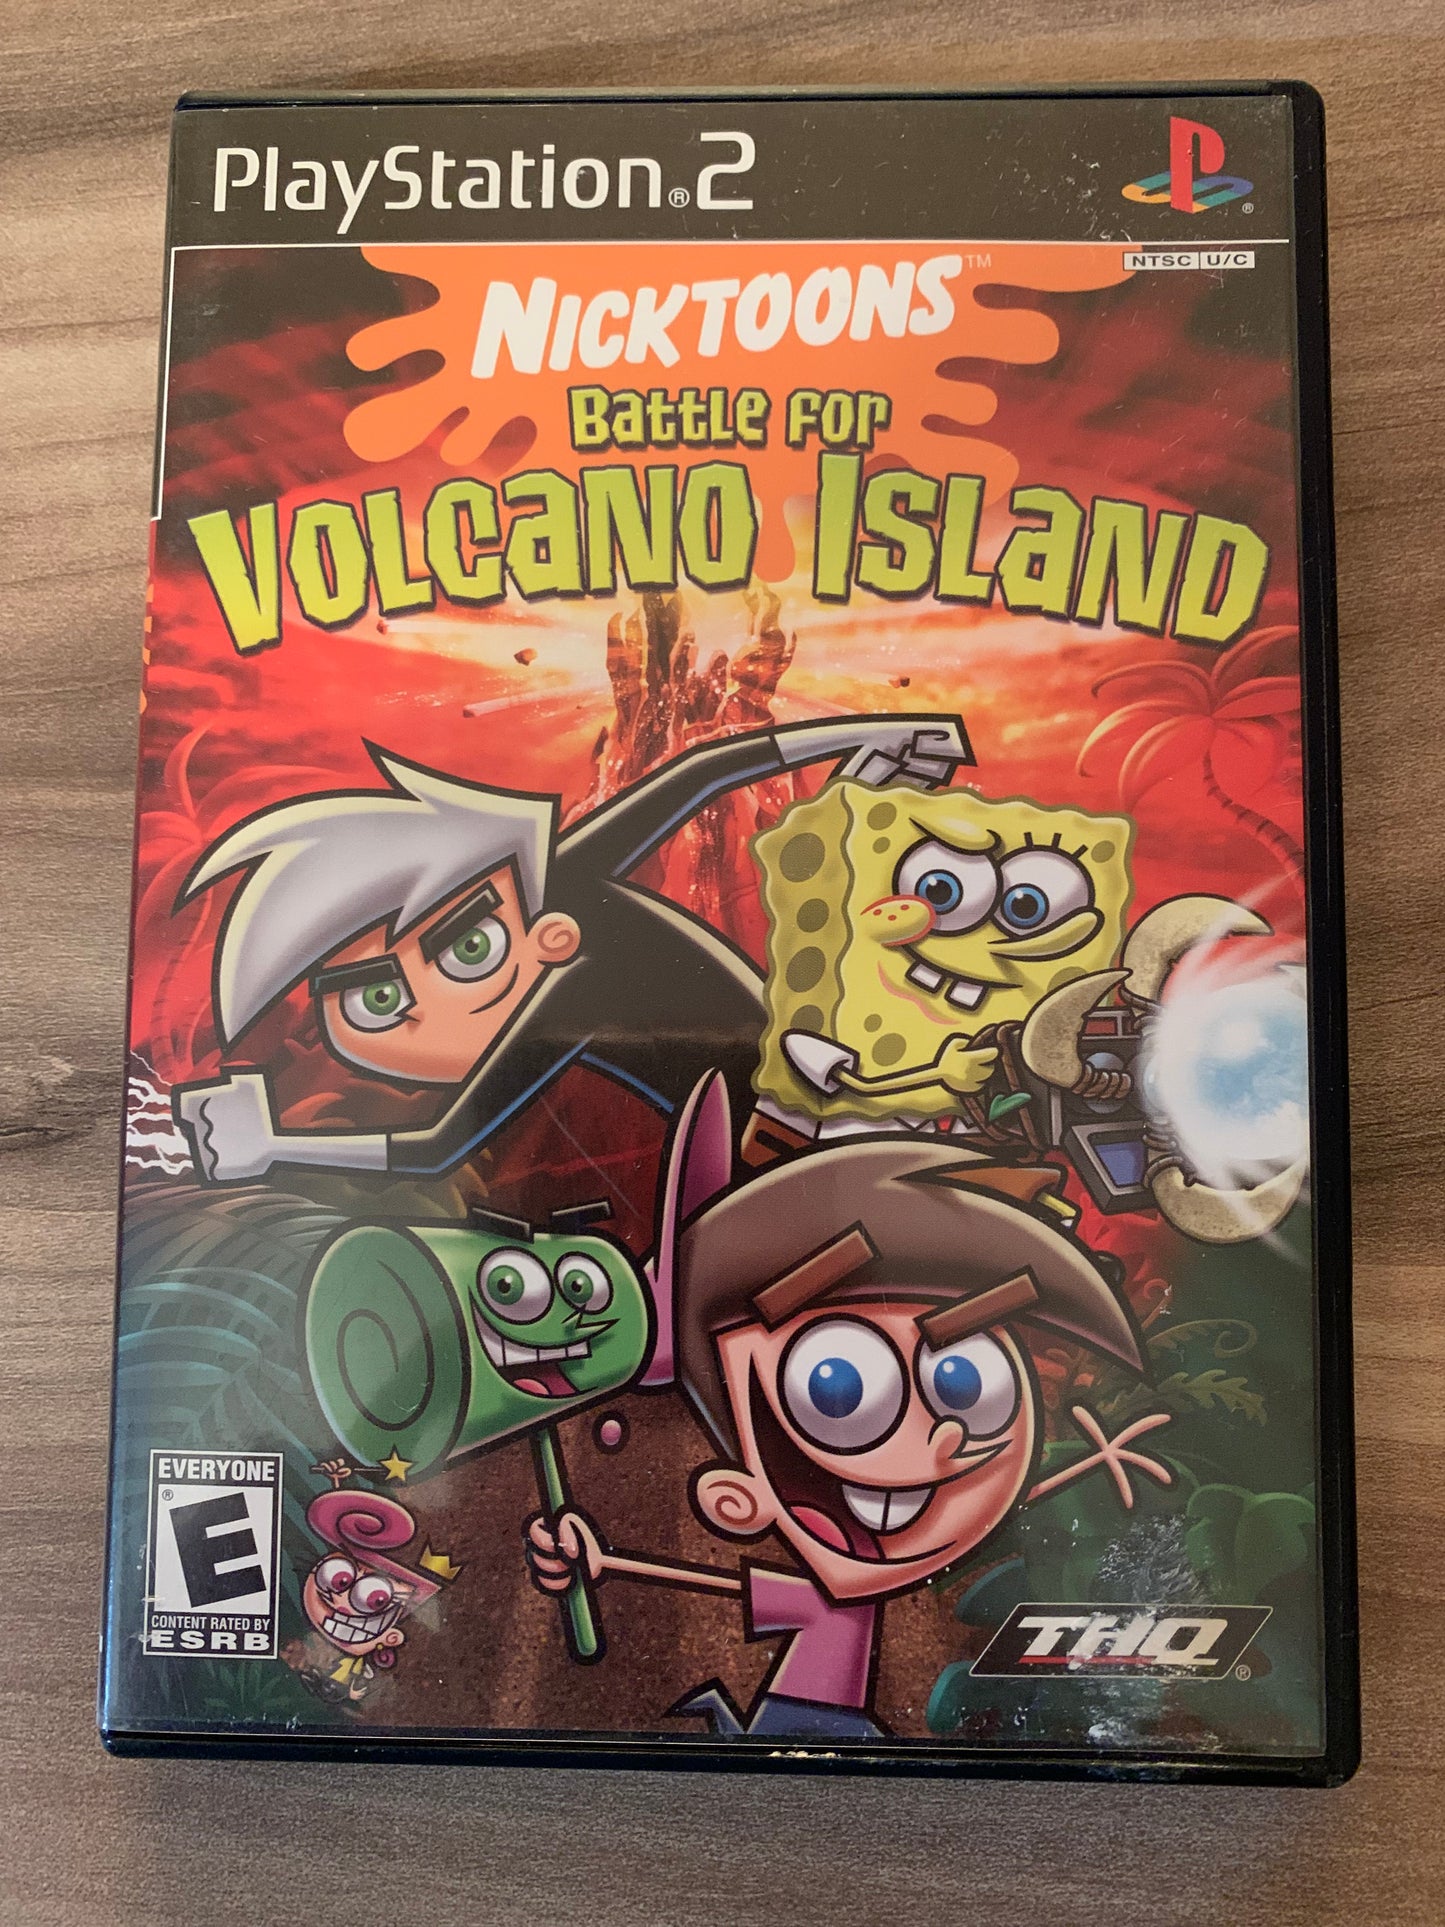 SONY PLAYSTATiON 2 [PS2] | NiCKTOONS BATTLE FOR VOLCANO iSLAND